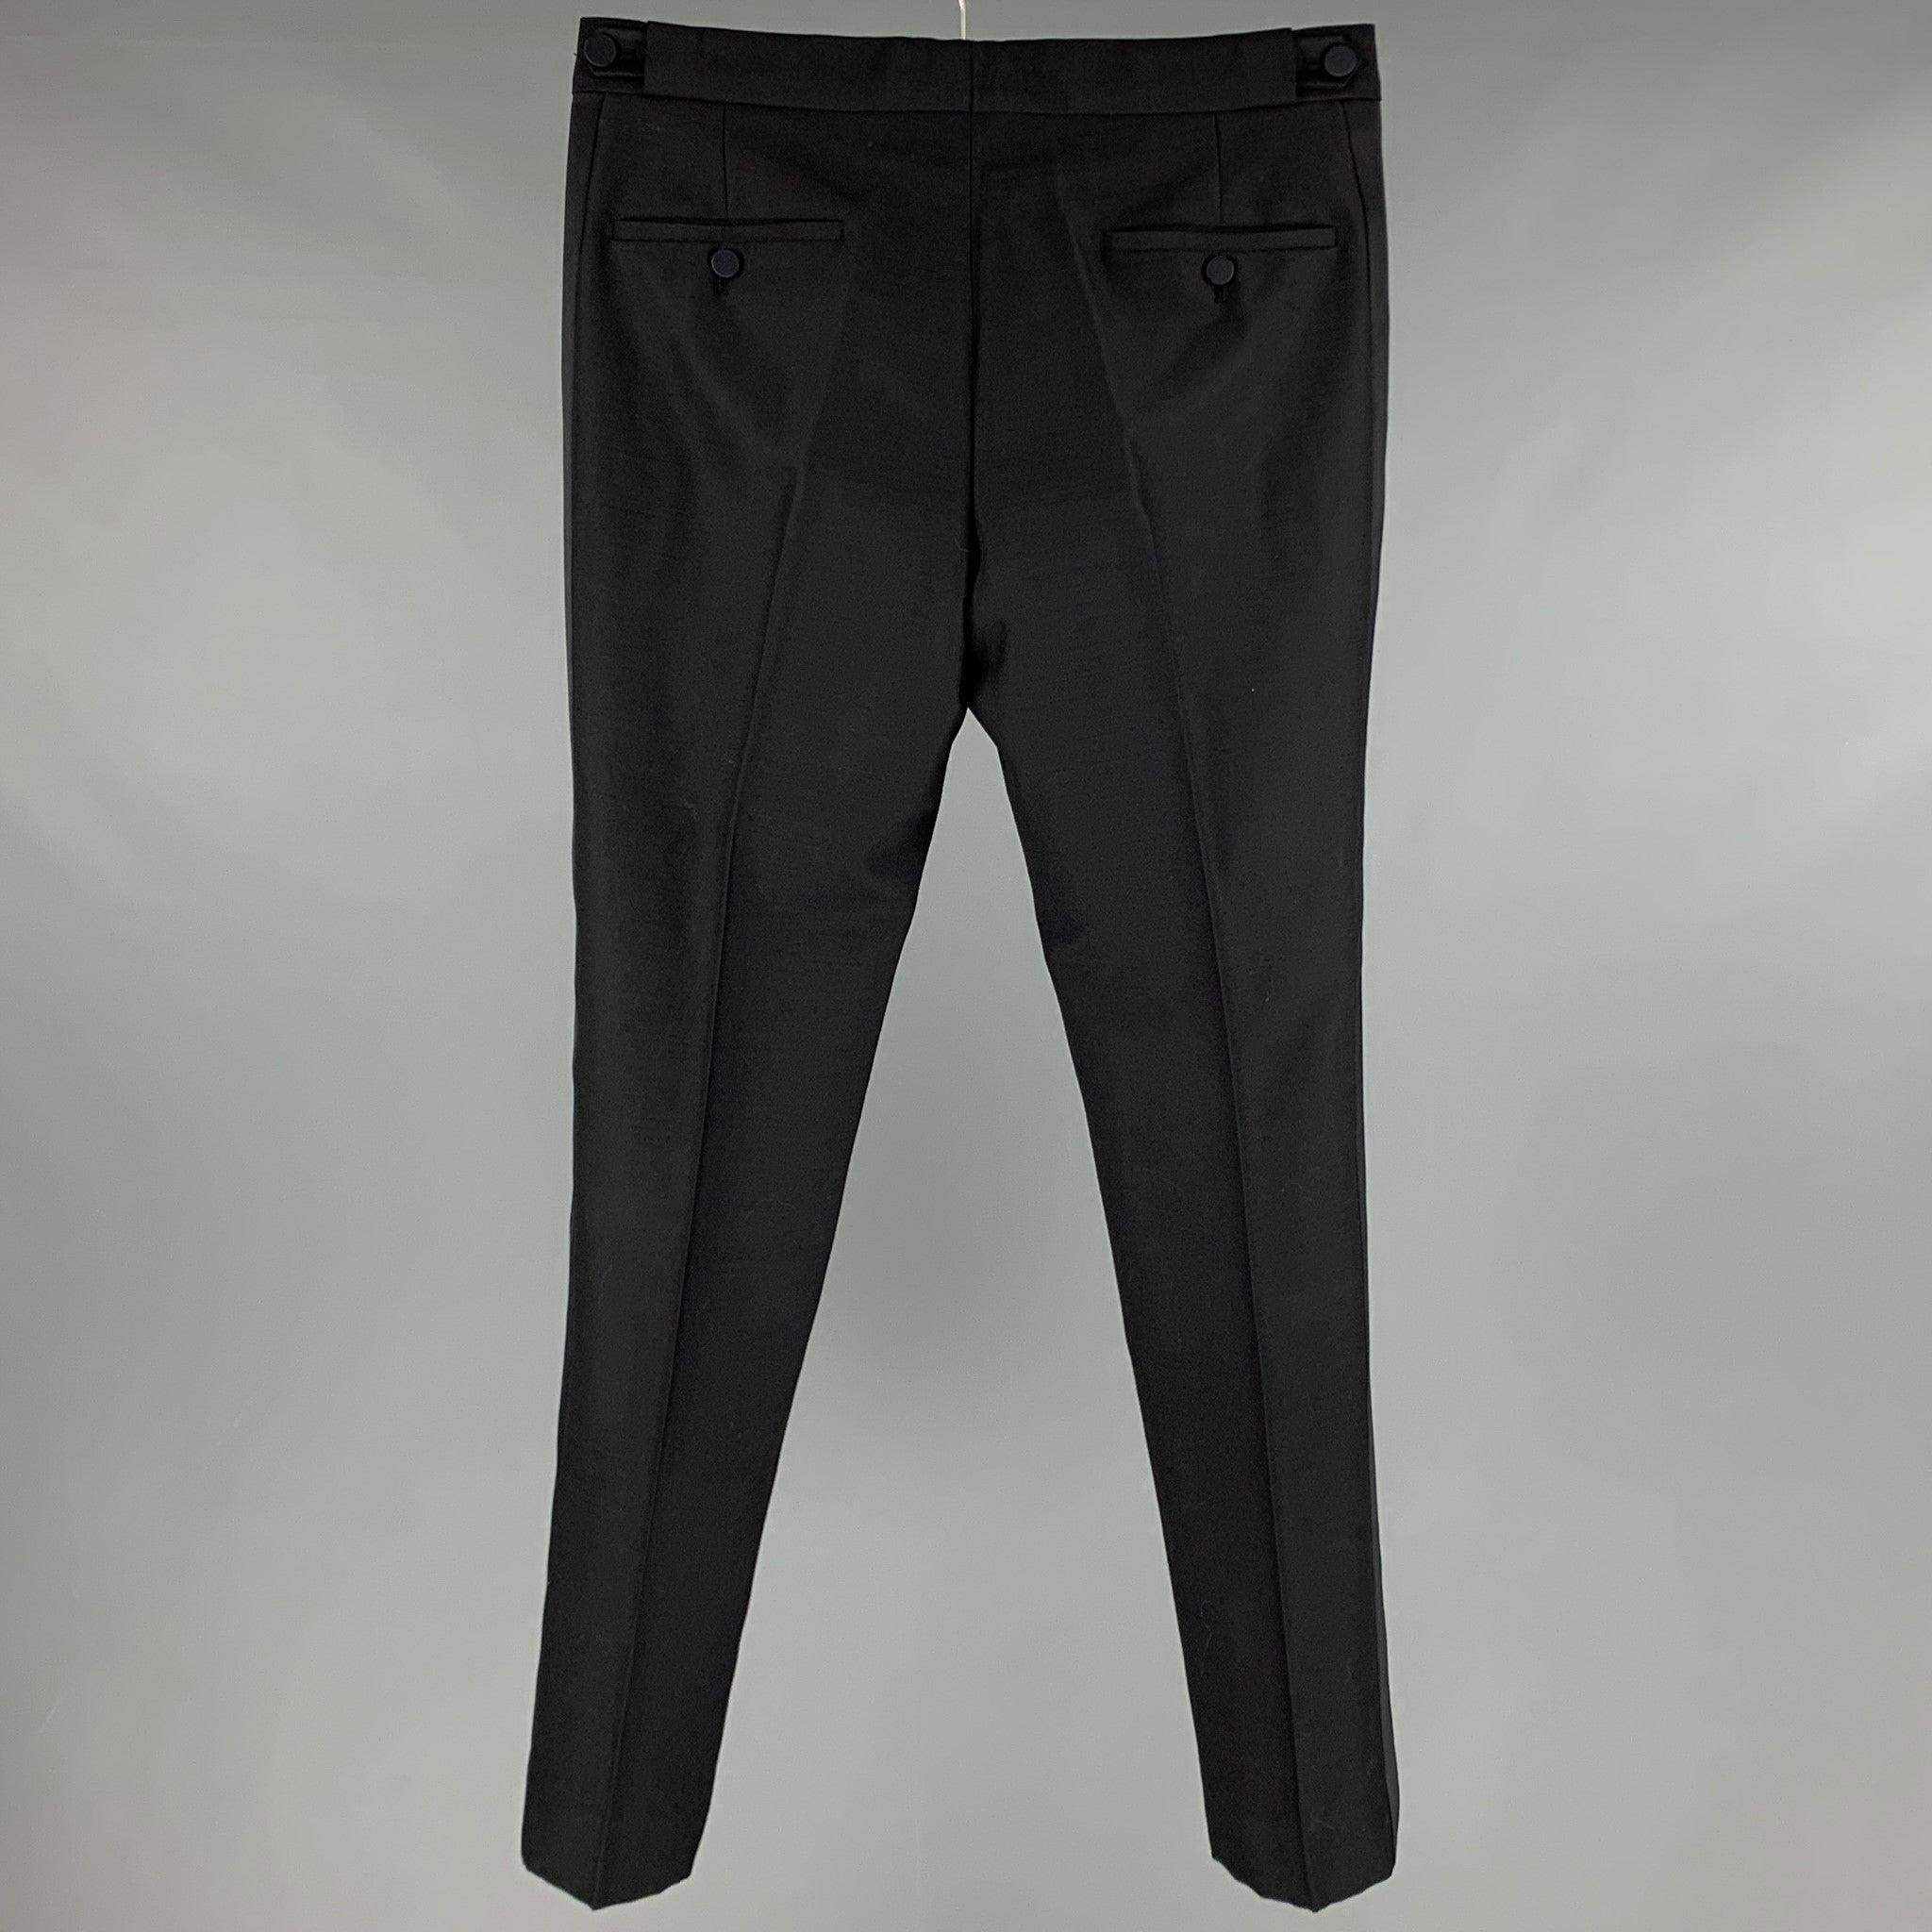 MARC JACOBS dress pants
in a black wool blend fabric featuring tuxedo stripes, side tabs, and a zip fly closure. Made in Italy.Excellent Pre-Owned Condition. 

Marked:   48 

Measurements: 
  Waist: 32 inches Rise: 8.5 inches Inseam: 31 inches Leg